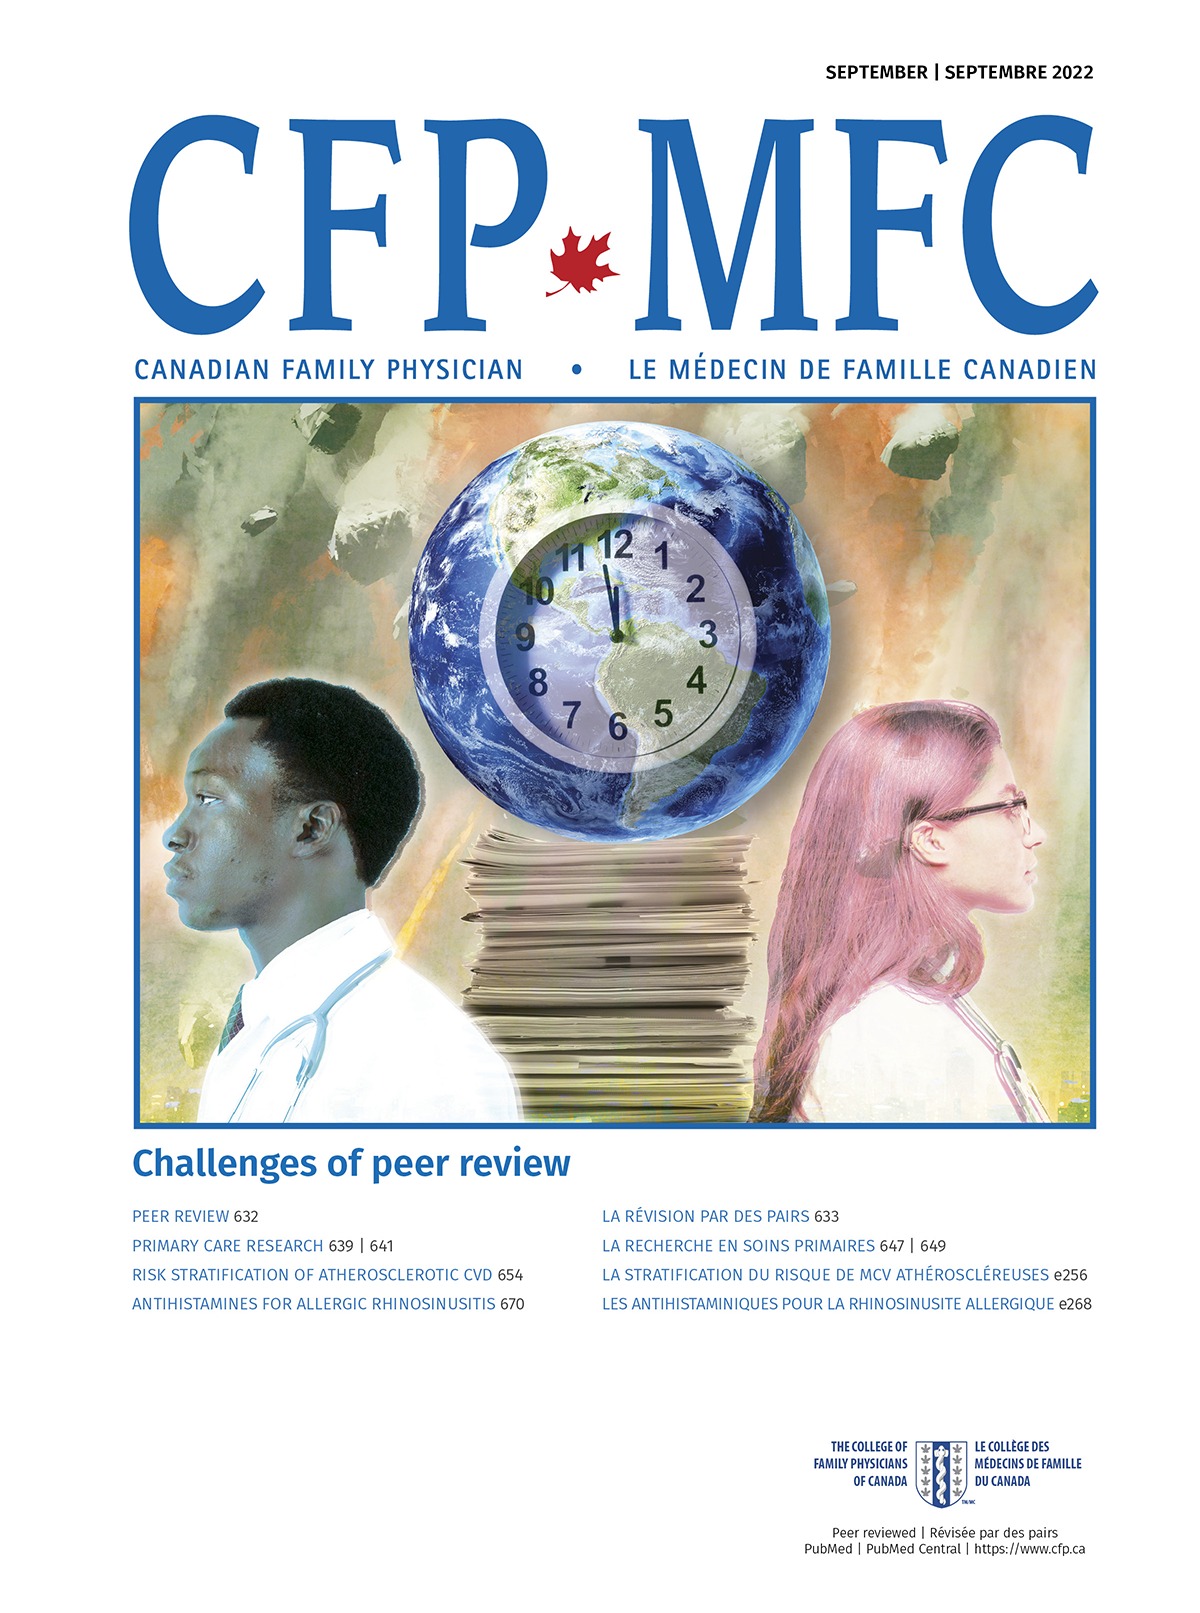 Fiftieth anniversary of NAPCRG: Canadian contributions and personal reflections